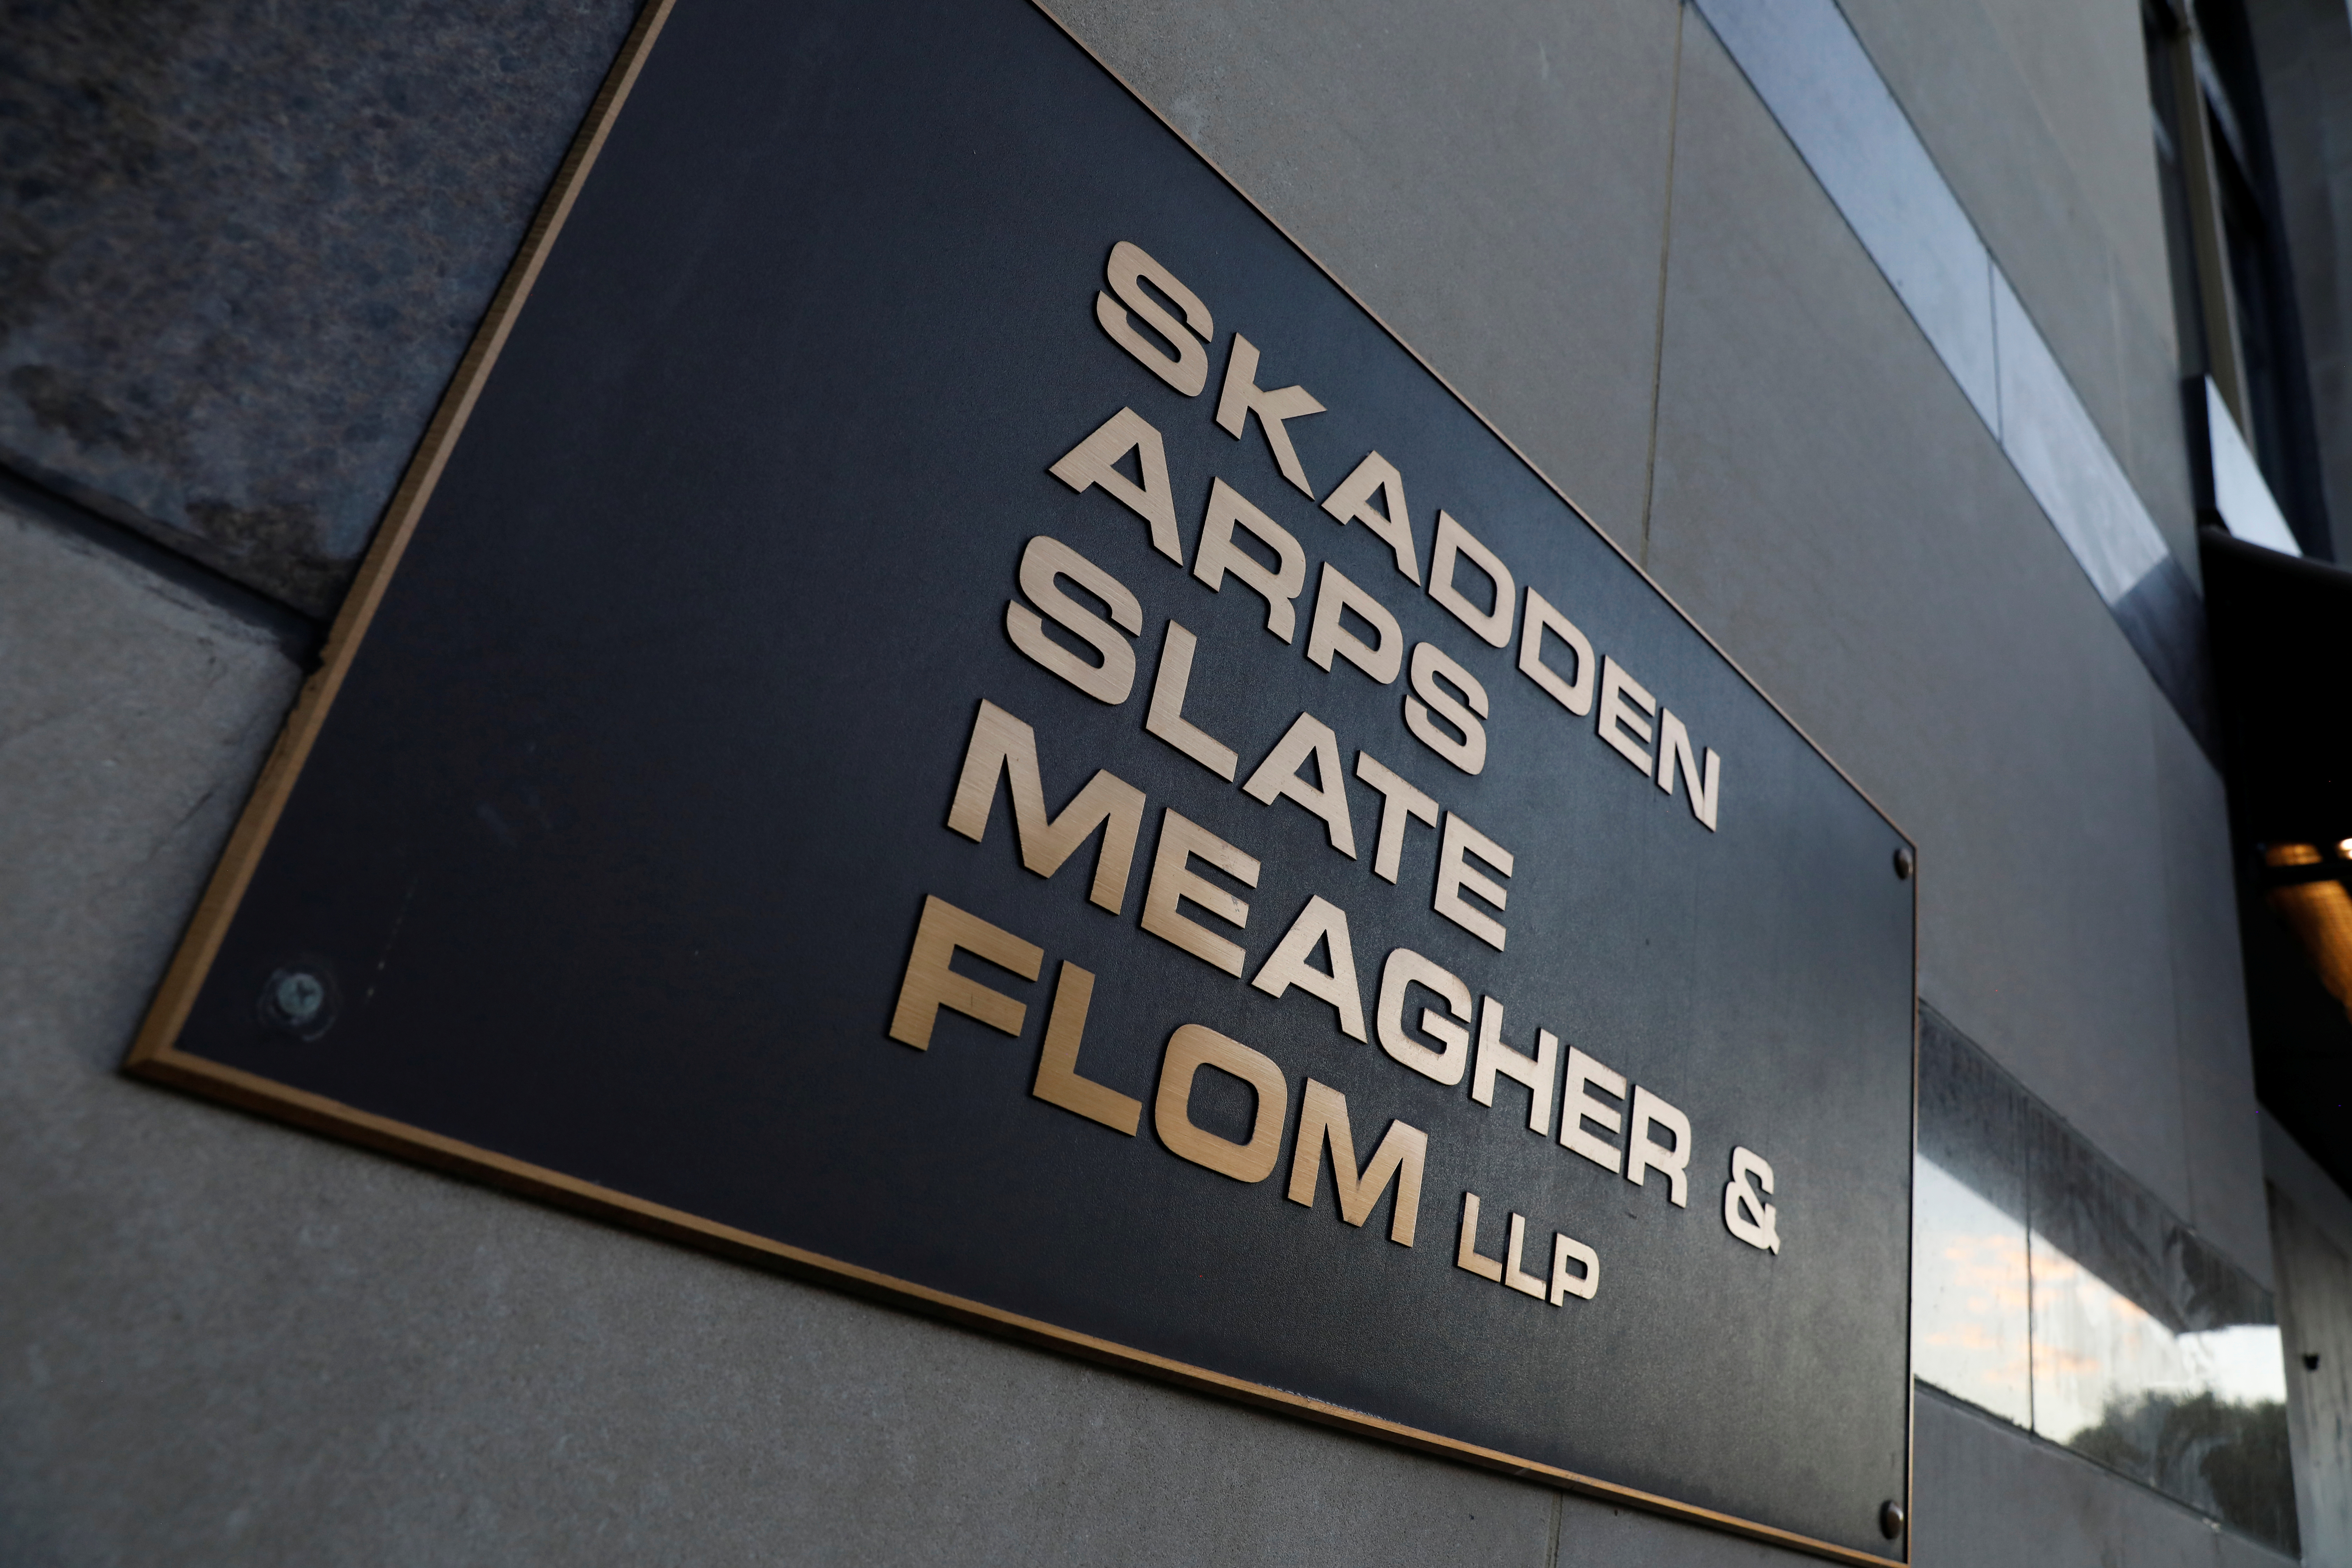 Signage is seen outside of the law firm Skadden, Arps, Slate, Meagher & Flom LLP in Washington, D.C., U.S., August 30, 2020. REUTERS/Andrew Kelly